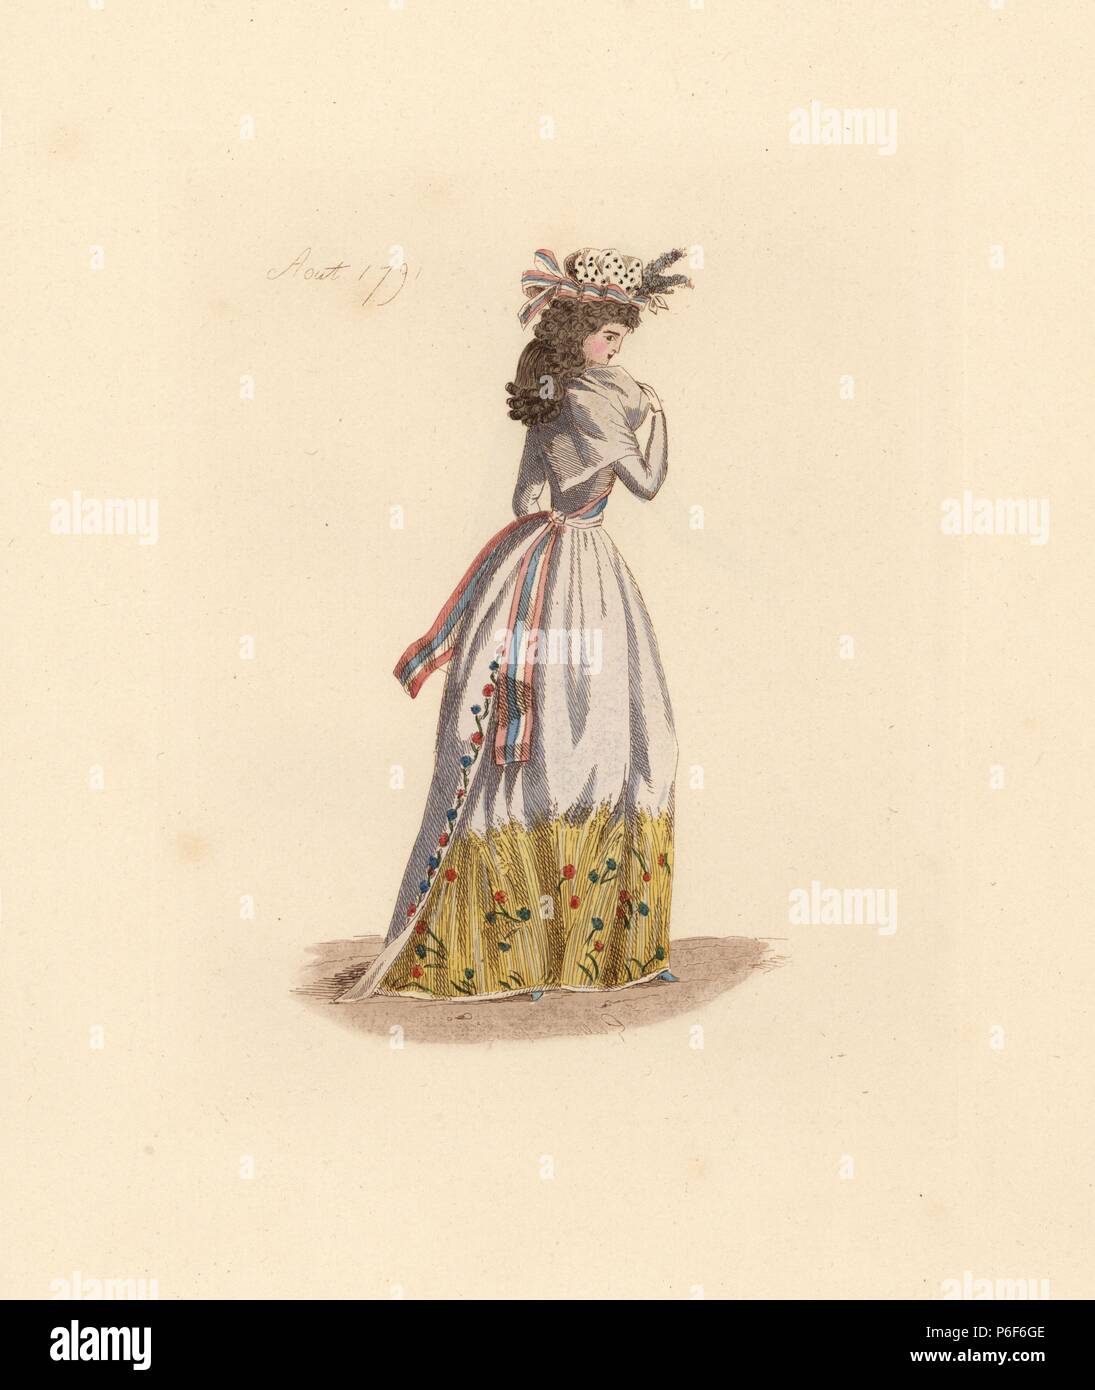 French woman wearing the fashion of August 1791. She wears a liberty cap with ribbons, large wig, fichu (neckerchief), redingote with tricolor ribbon, and embroidered petticoat. Handcoloured etching by Auguste Etienne Guillaumot Jr. from 'Costumes of the French Revolution, 1790-1793,' Bouton, New York, 1889. From the collection of contemporary costume prints of Victorien Sardou. Stock Photo